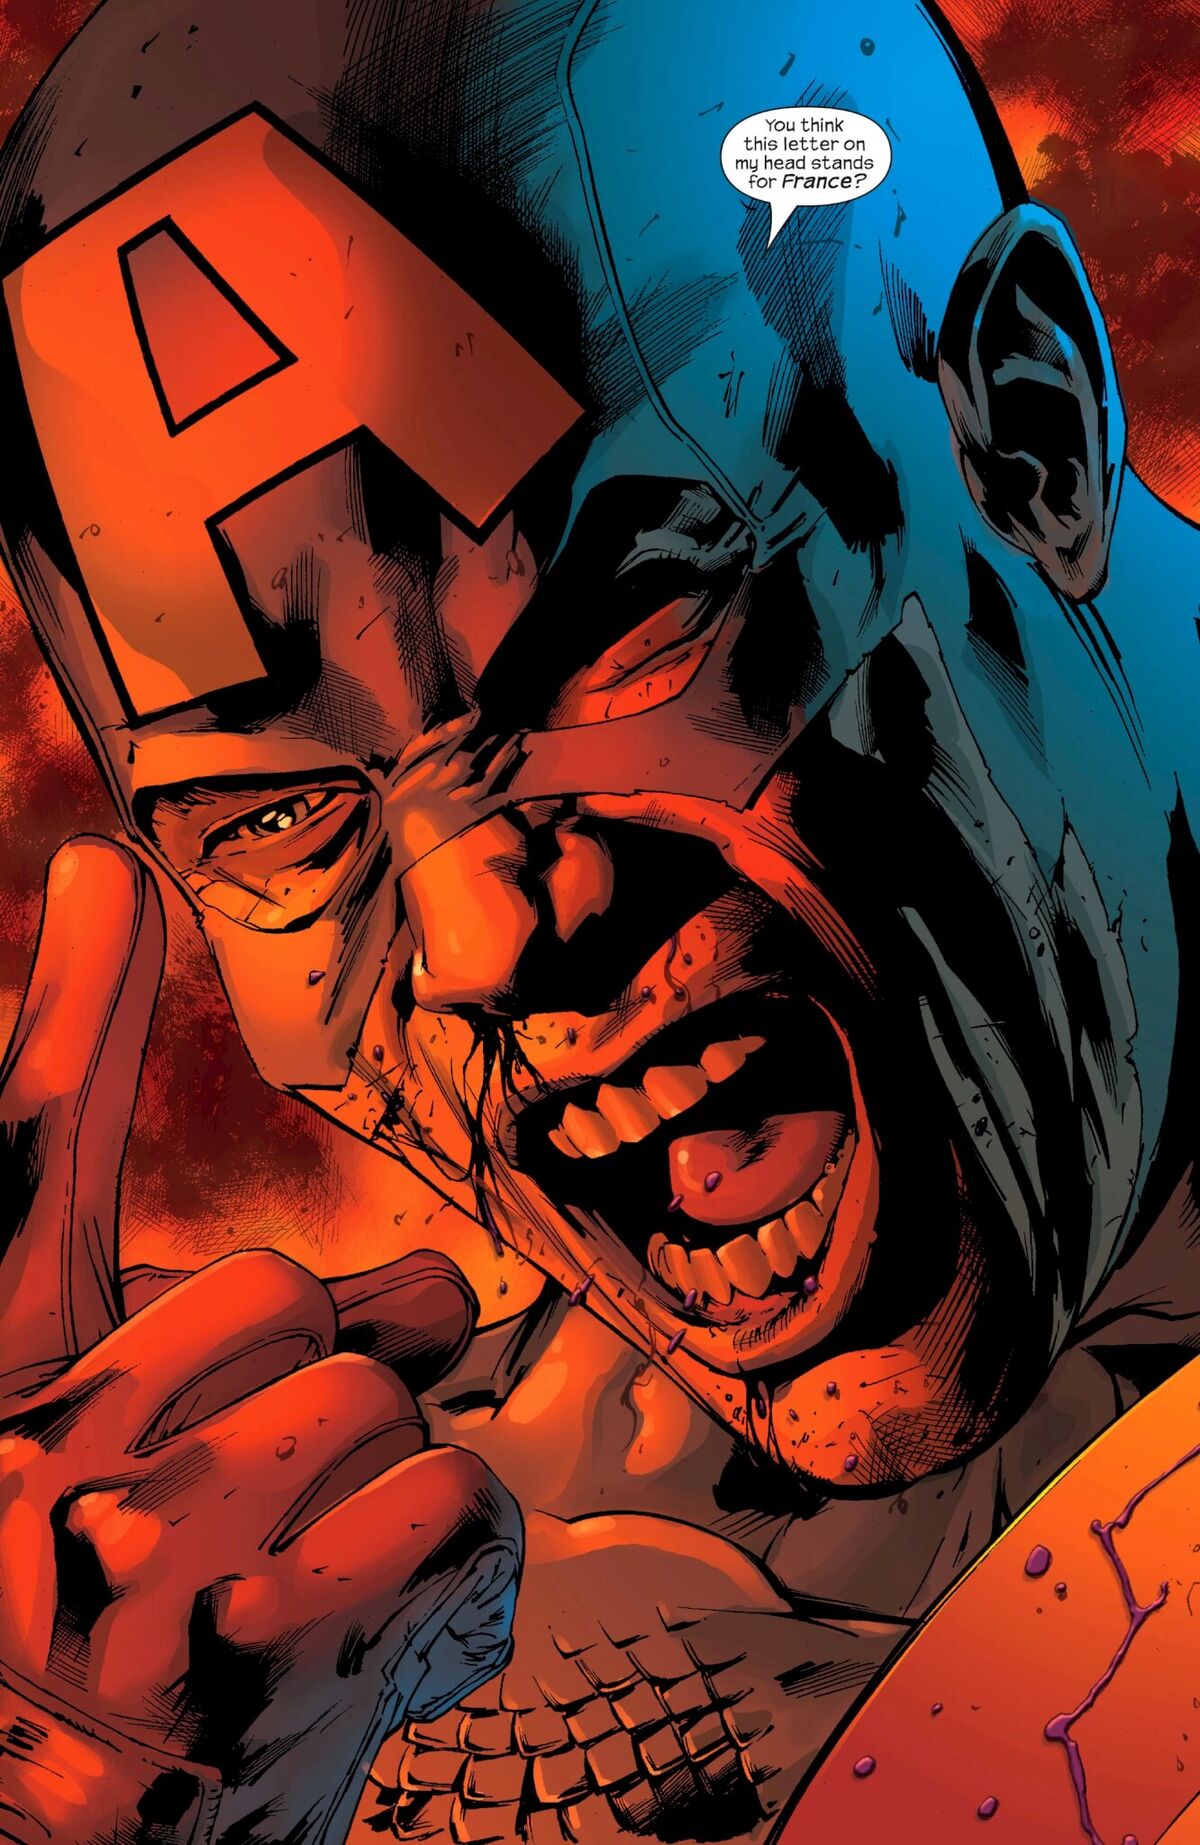 Captain America Ultimates 12 You Think This Letter on My Head Stands for France